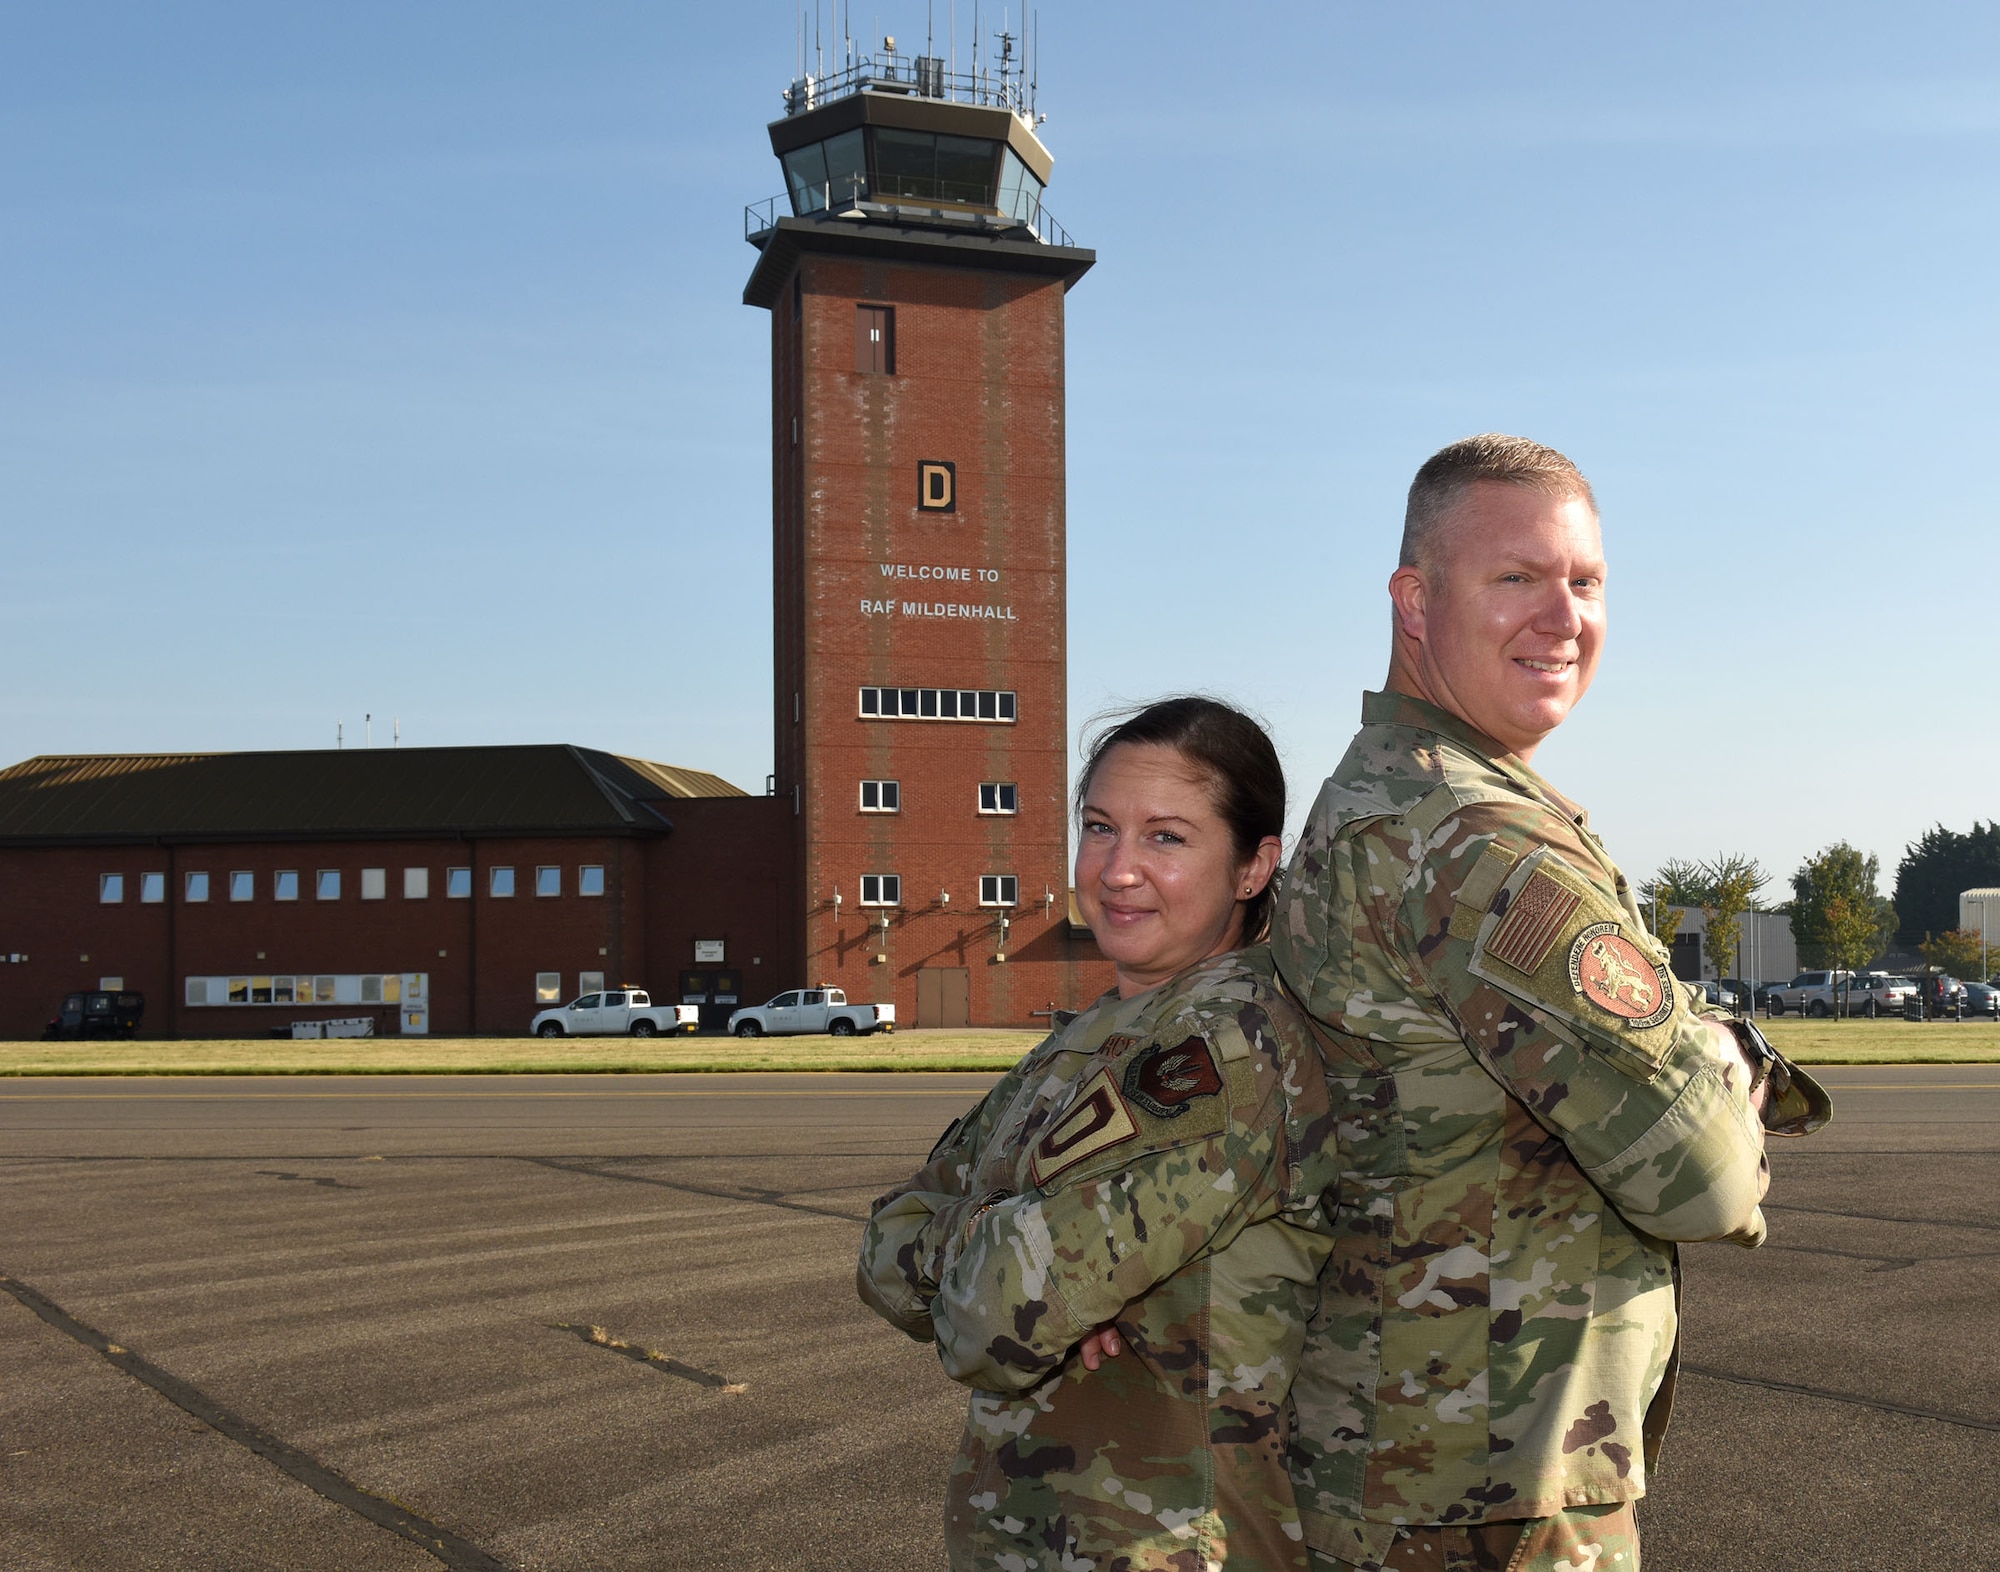 U.S. Air Force Senior Master Sgt. Rachel Castrovinci, left, 100th Operations Support Squadron senior enlisted leader, and Chief Master Sgt. Scott Castrovinci, 100th Security Forces Squadron senior enlisted leader, are currently on their second tour at Royal Air Force Mildenhall, England, Sept. 8, 2021. The couple were stationed together at Minot Air Force Base, North Dakota, when the terrorist attacks happened Sept. 11, 2001. They shared their stories and memories of that day, for the 20th anniversary of 9/11. (U.S. Air Force photo by Karen Abeyasekere)